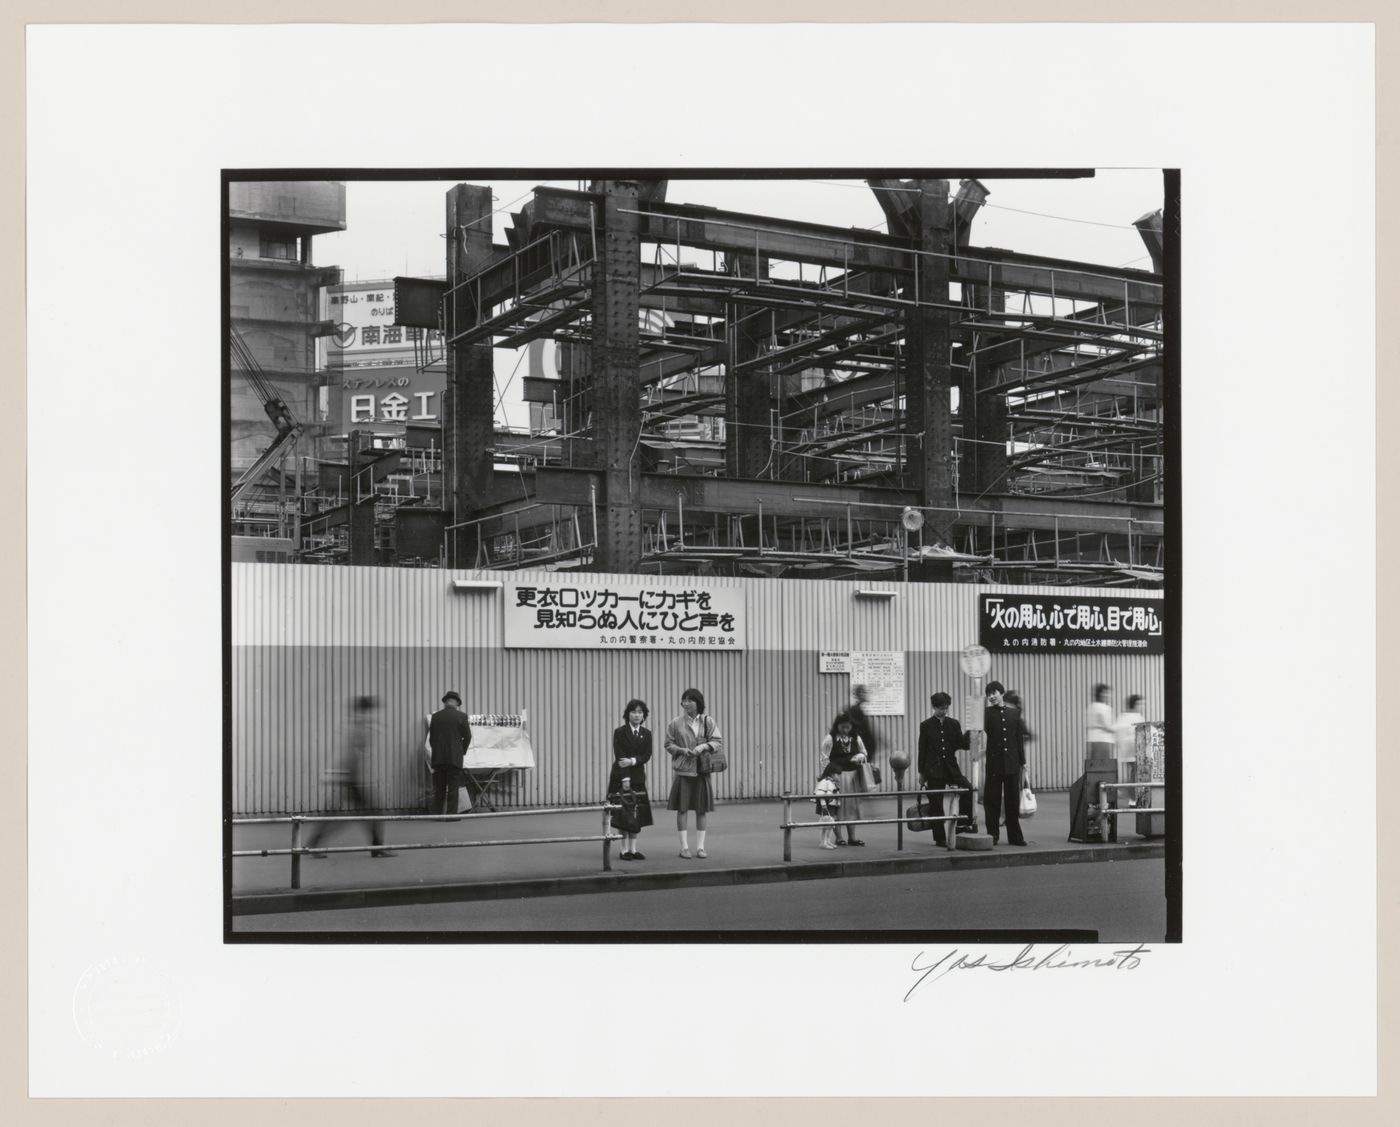 View of pedestrians, metal hoarding and a building under construction, Tokyo, Japan